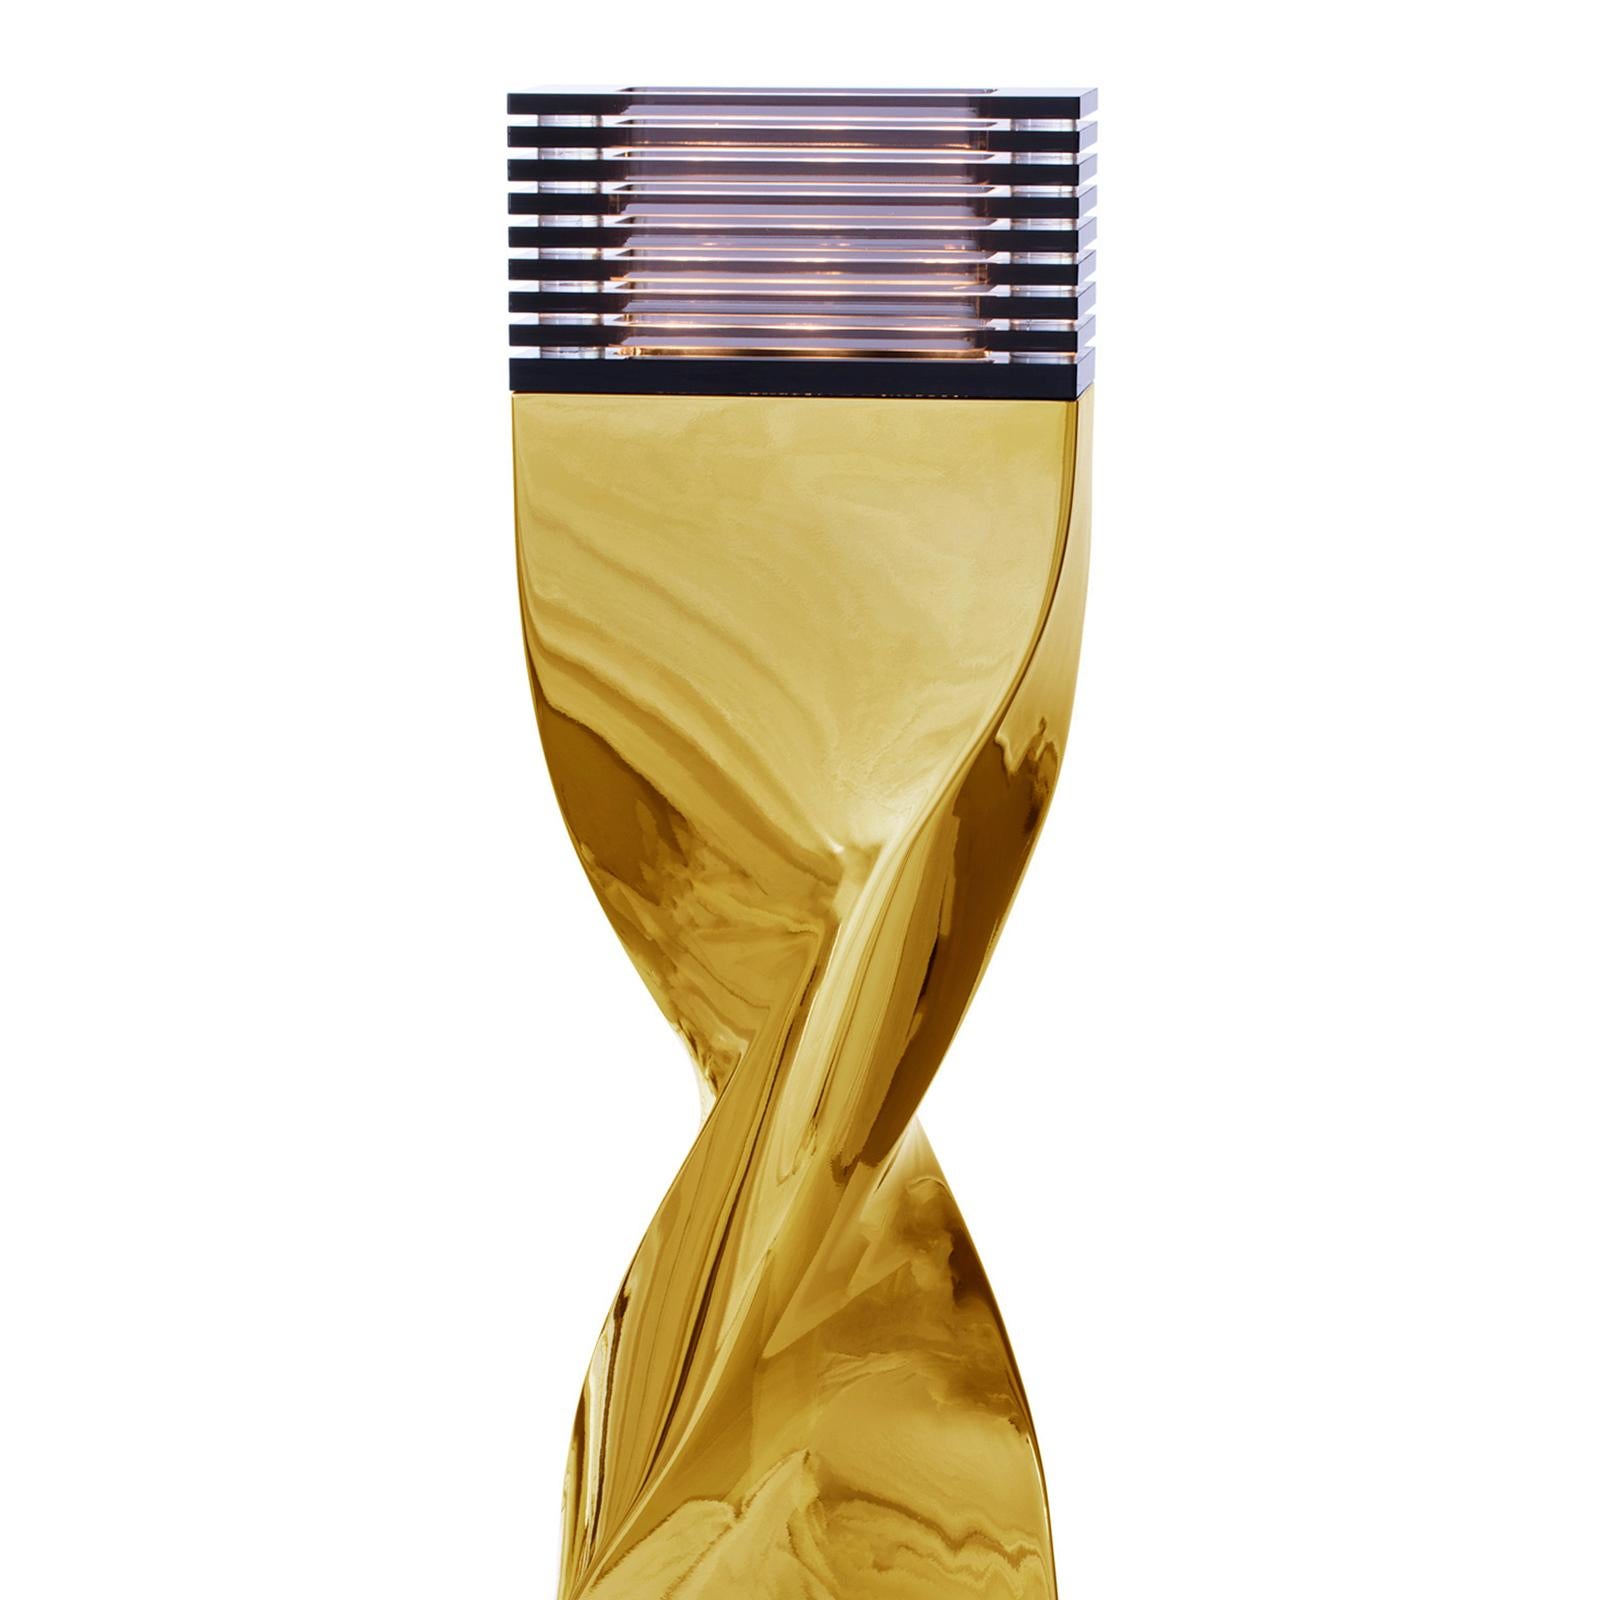 Table lamp bow Tie Alu gold XL with structure in casted aluminum
in crafted gold finish. With altuglass lamp diffuser at the top.
3 led bulbs, lamp holder type GU10 socket, with dimmer. Bulbs not
included. Weight: 7 kg. Available in:
Table lamp bow